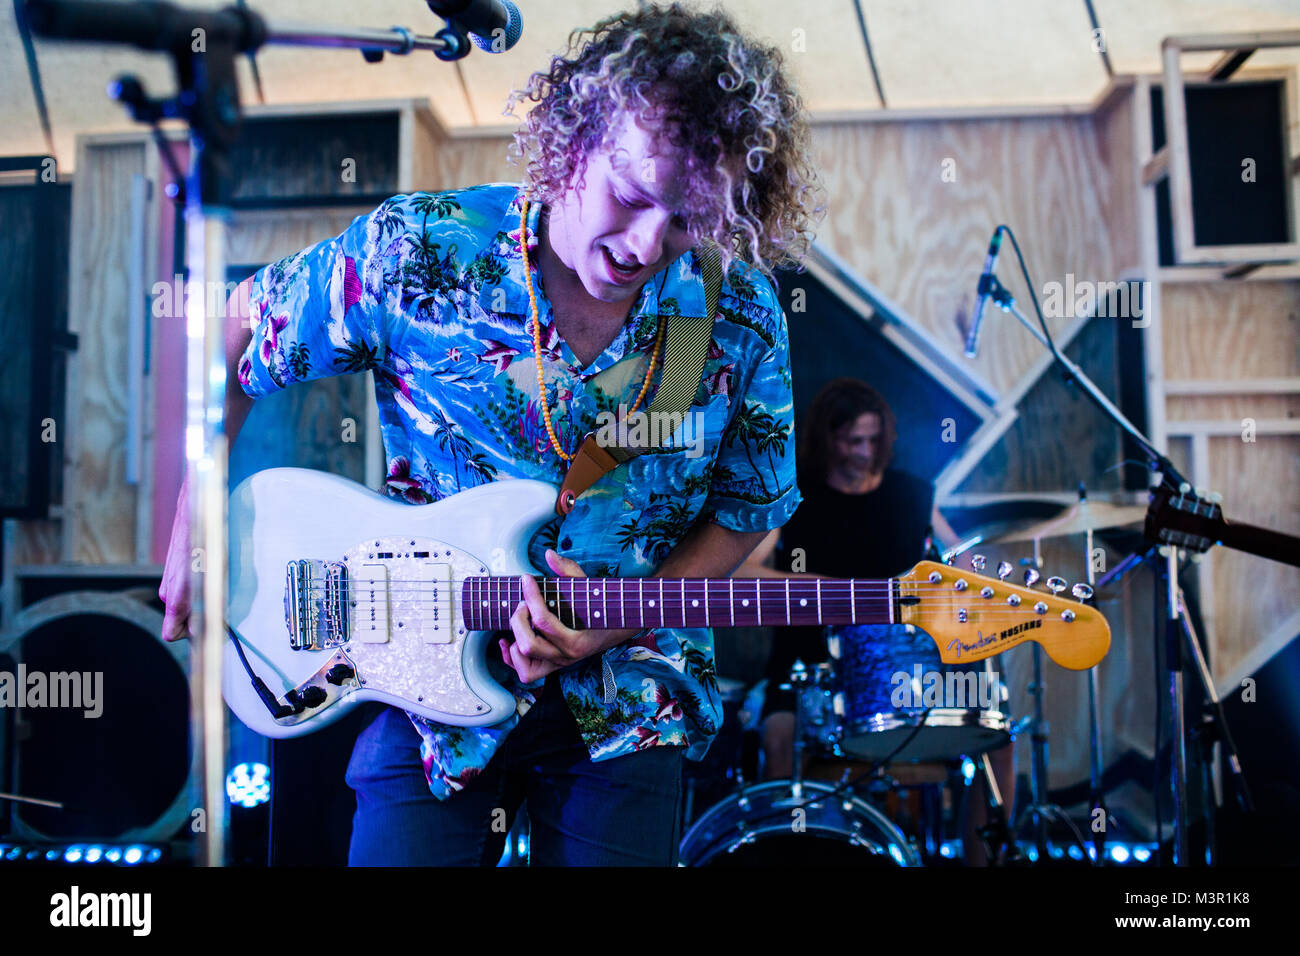 The four London musicians Harry Edwards, Sam Chapman, Mark Thompson and Charlie Pelling are together known as the British band Maui. They are here pictured at a live concert at the Danish art and music festival Trailerpark Festival 2014 in Copenhagen. Denmark, 31/07 2014. Stock Photo